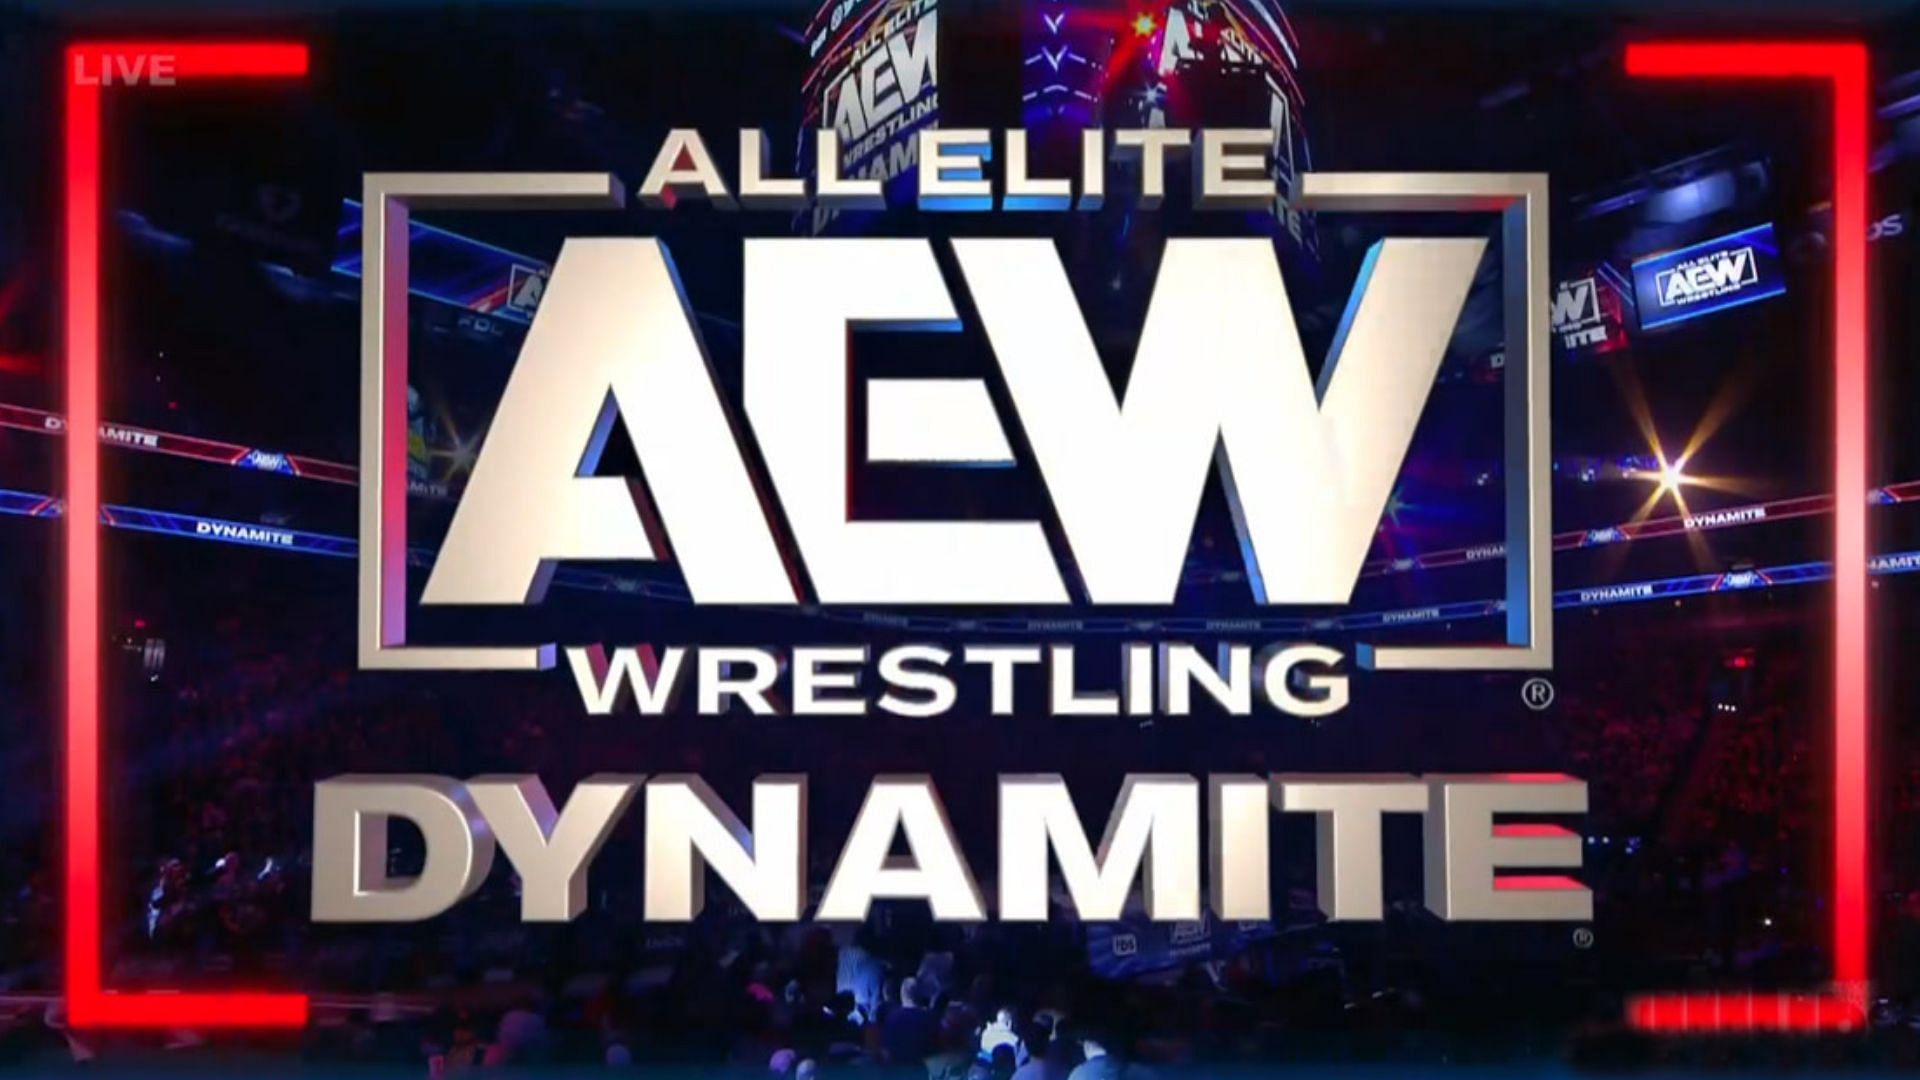 Which legendary wrestling family will be at AEW Dynamite next week?